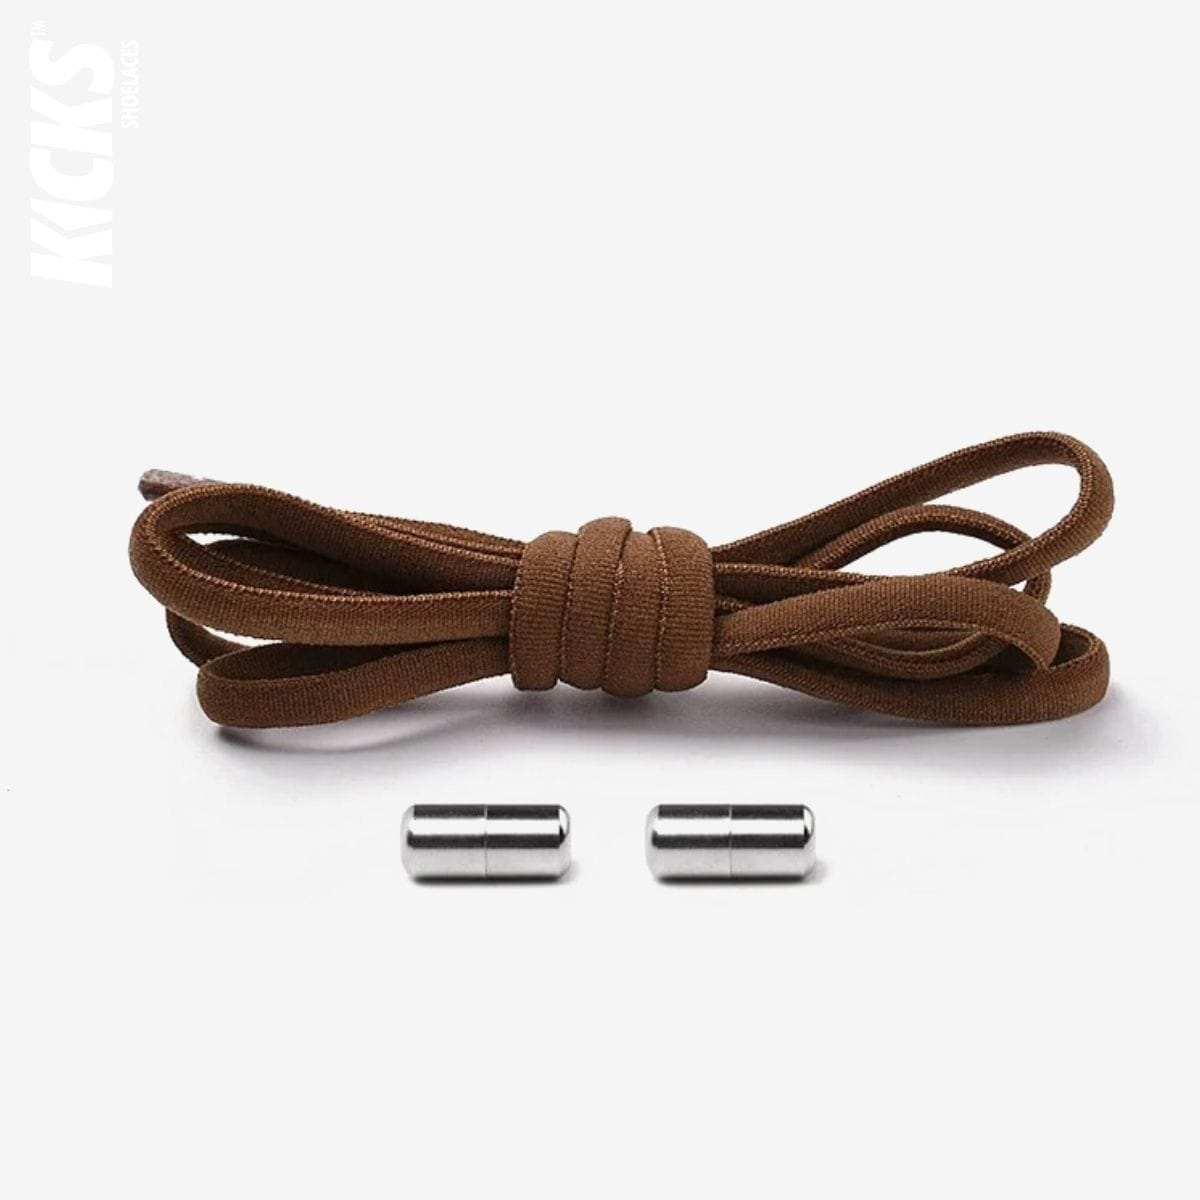 brown-kids-elastic-no-tie-shoe-laces-for-sneakers-by-kicks-shoelaces